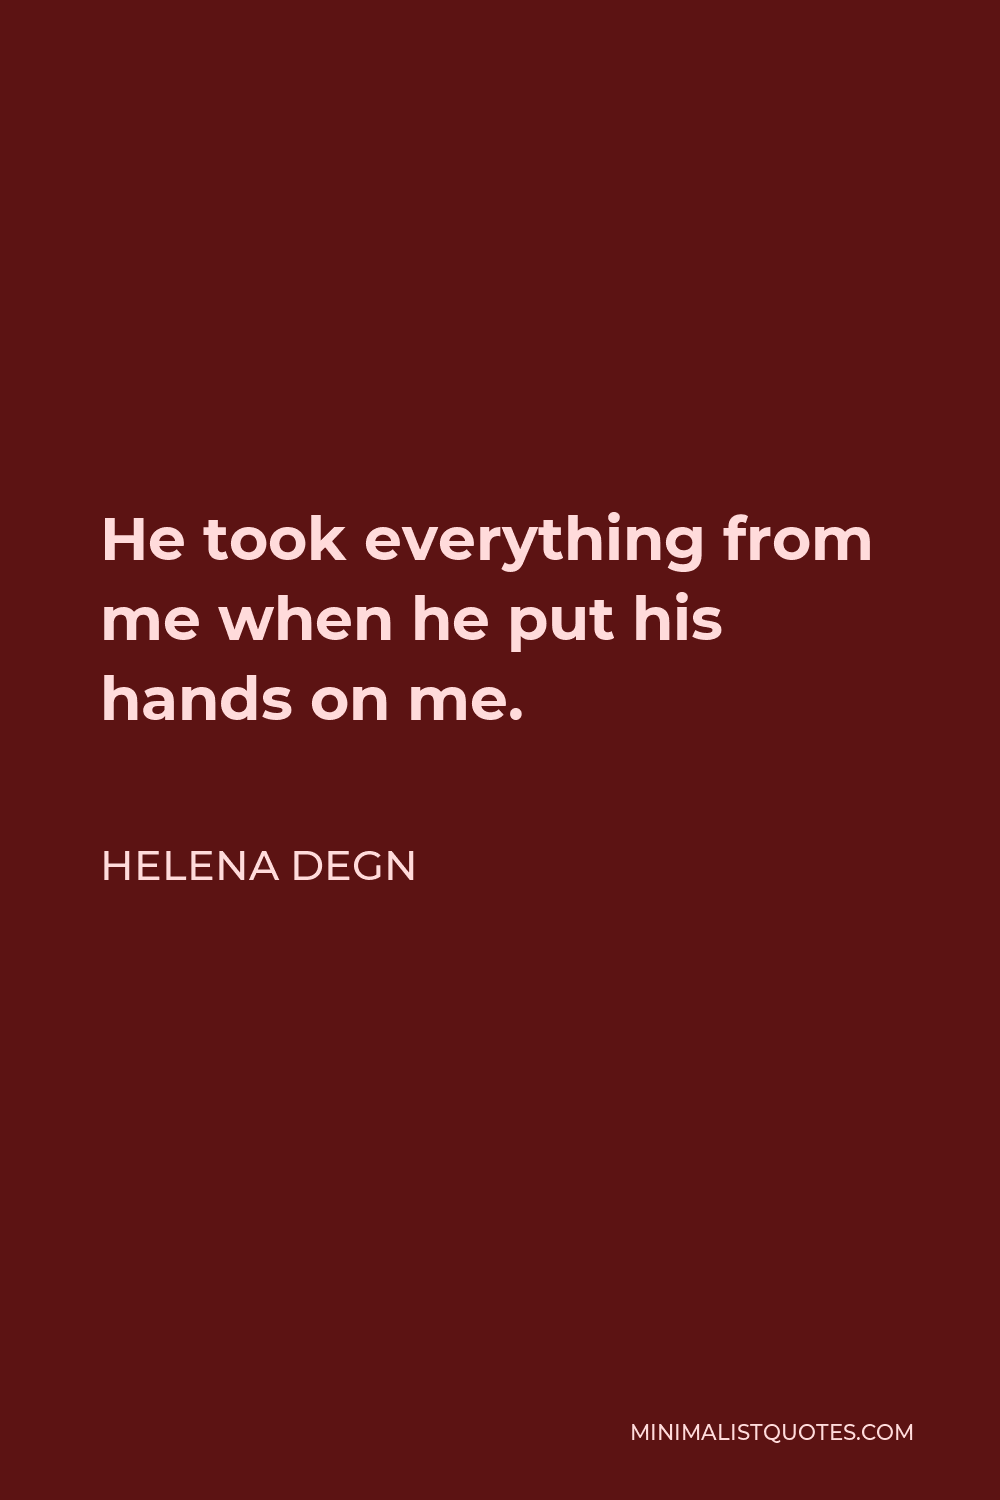 Helena Degn Quote - He took everything from me when he put his hands on me.